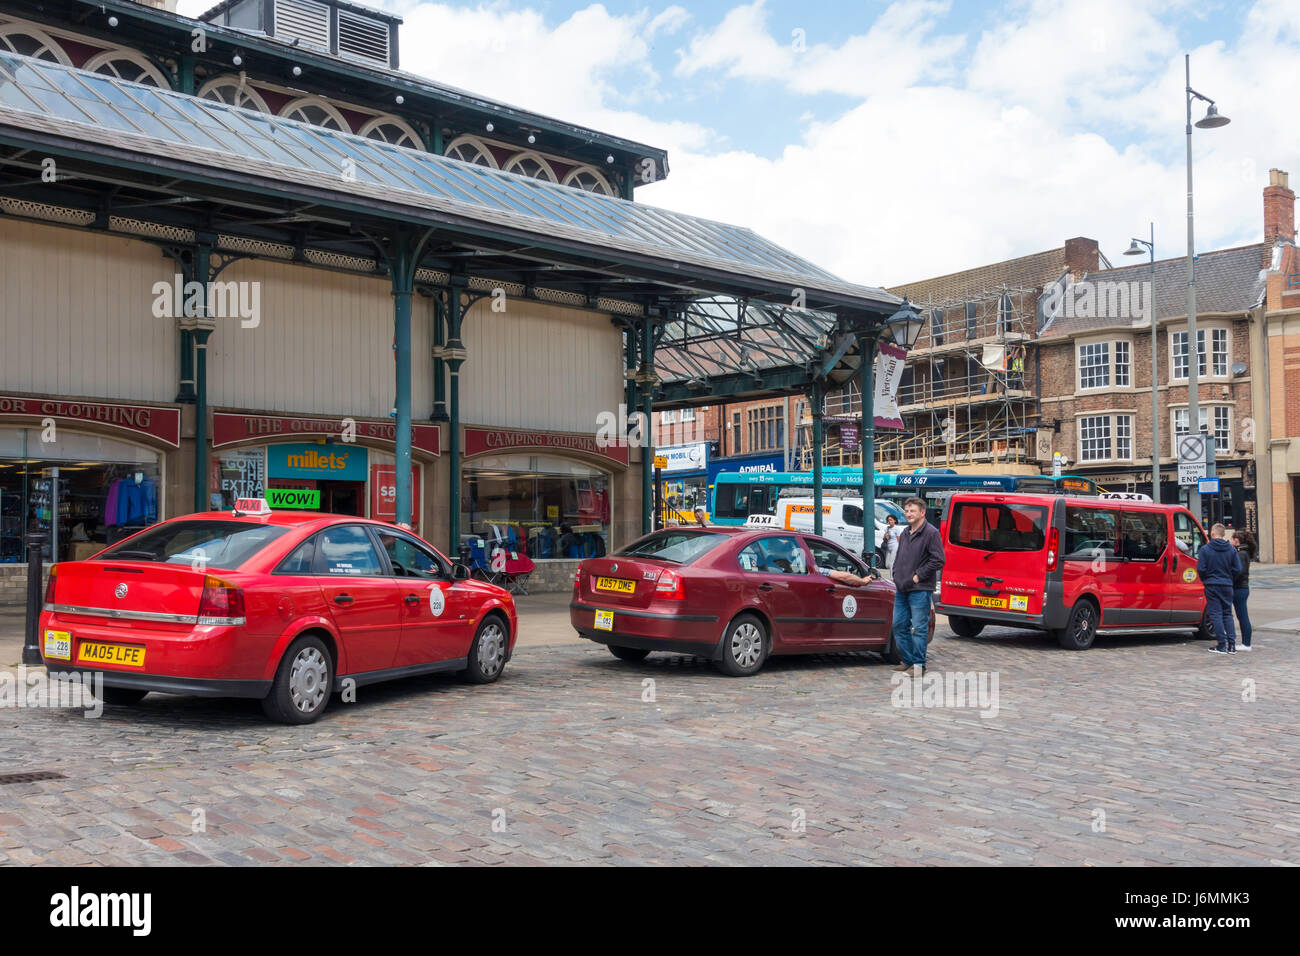 Taxi rank with red taxis waiting in the Market Square in Darlington Co. Durham Stock Photo